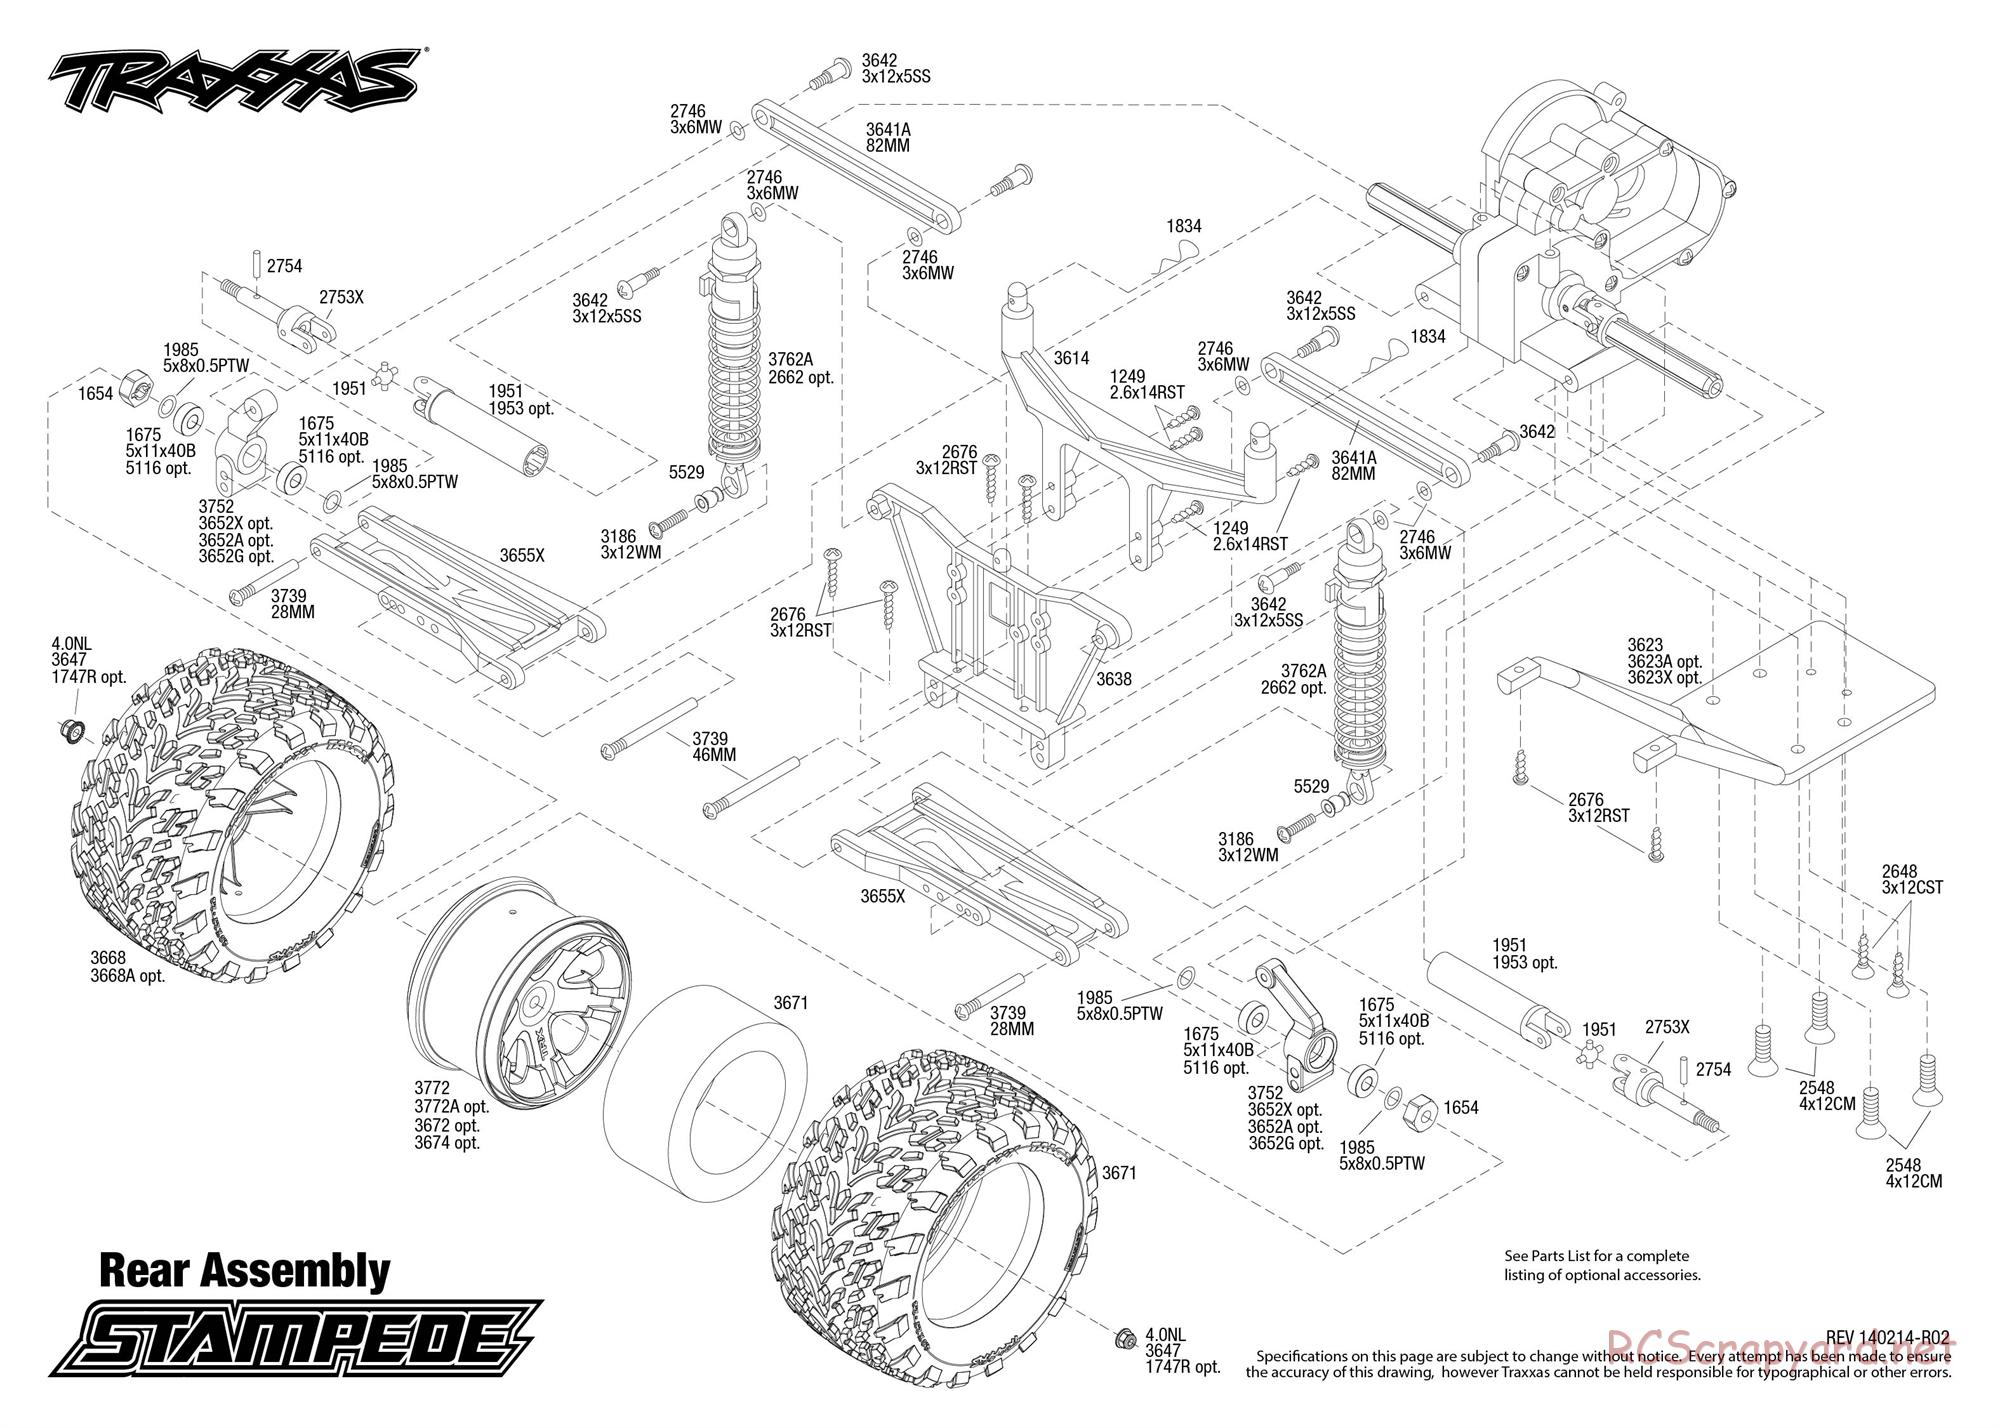 Traxxas - Stampede XL-5 - Exploded Views - Page 3